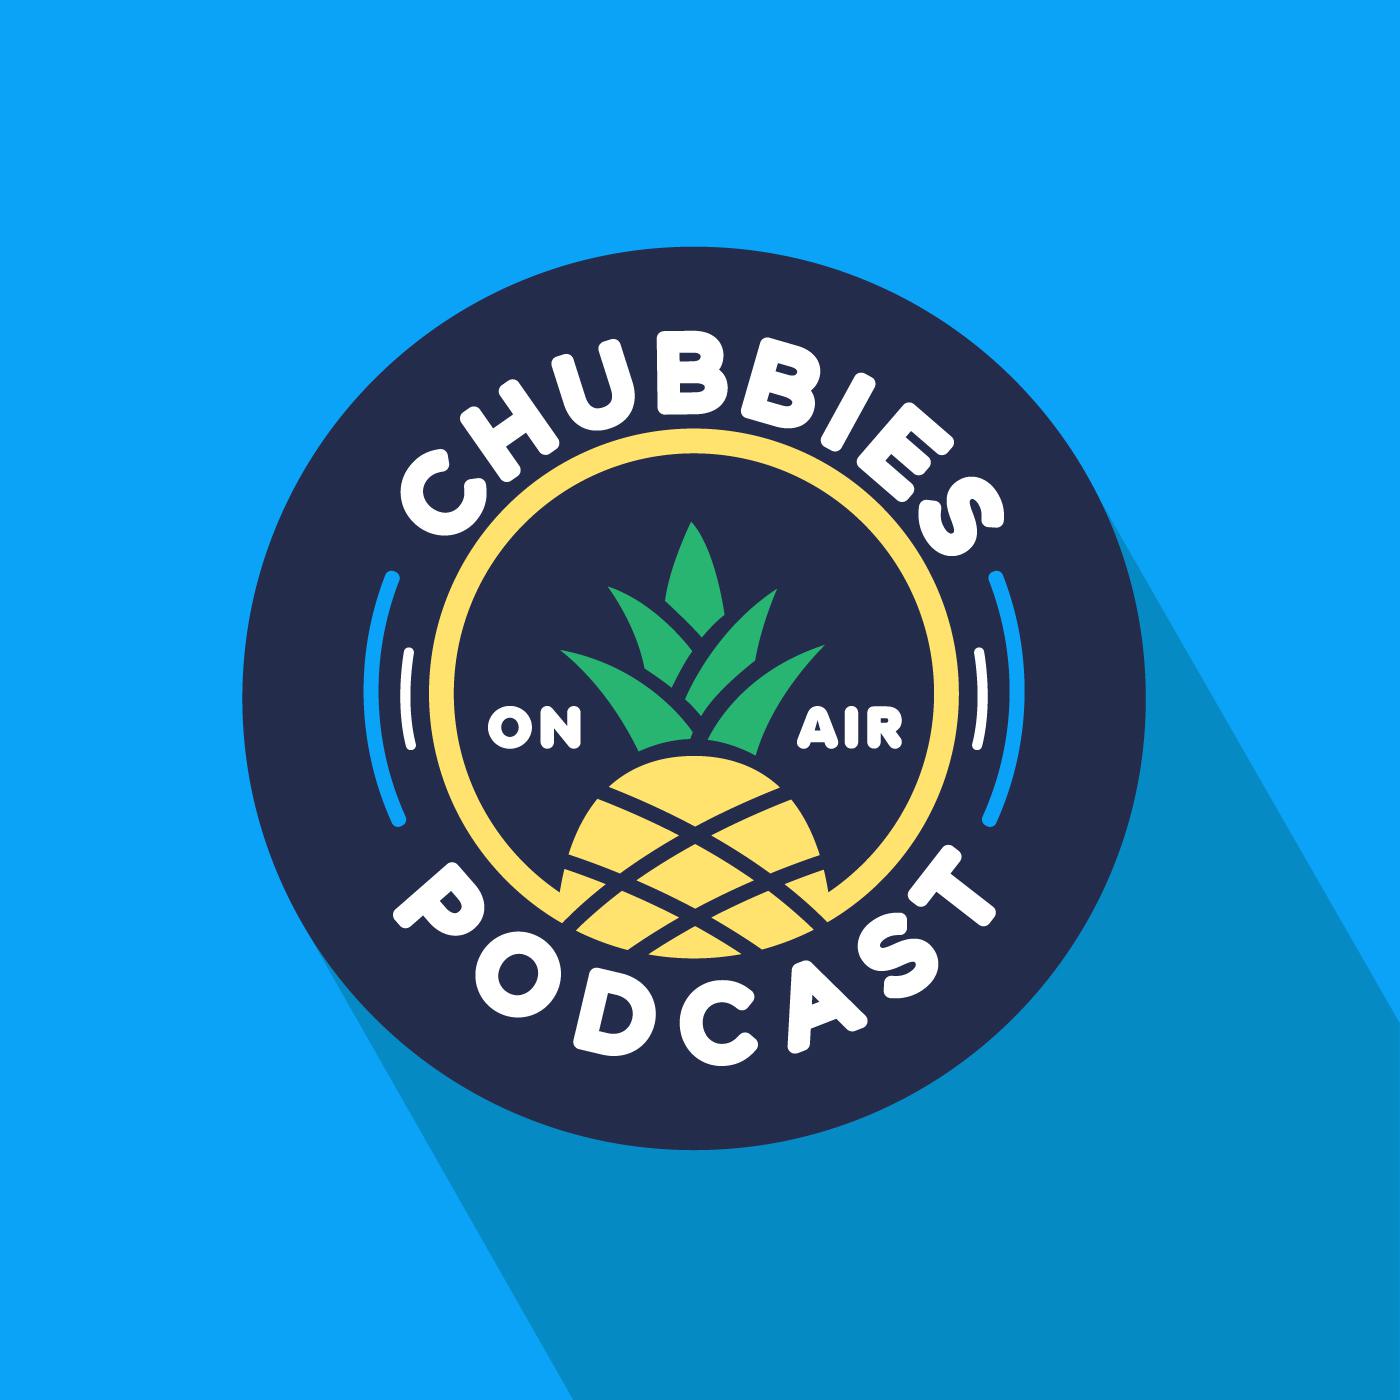 Chubbies Podcast.